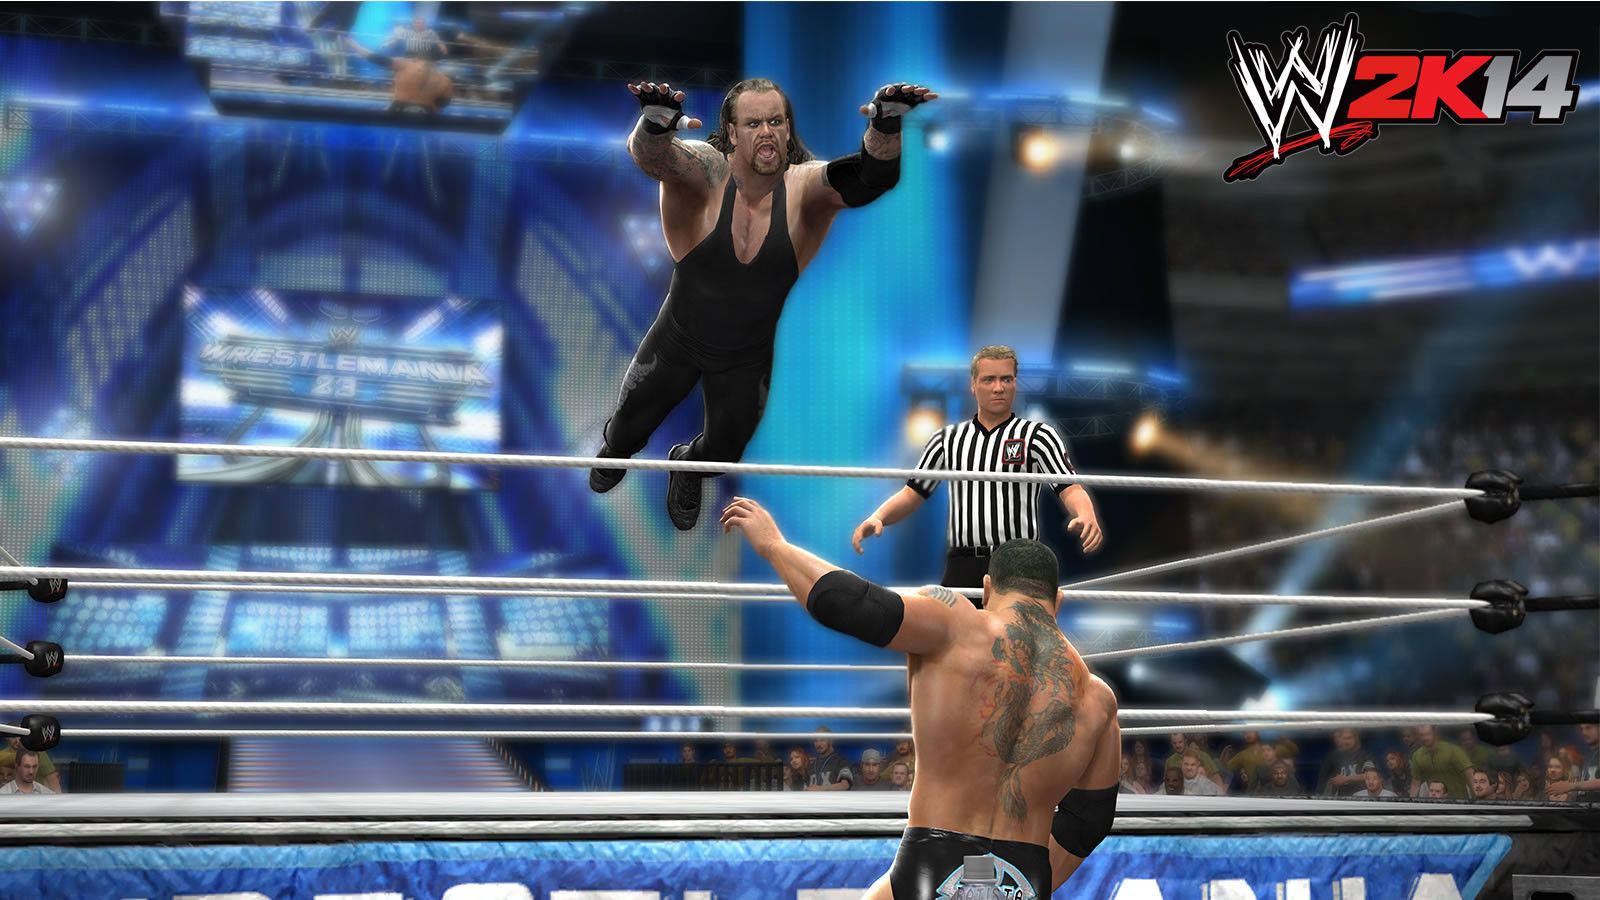 Wwe 2k14 download for pc